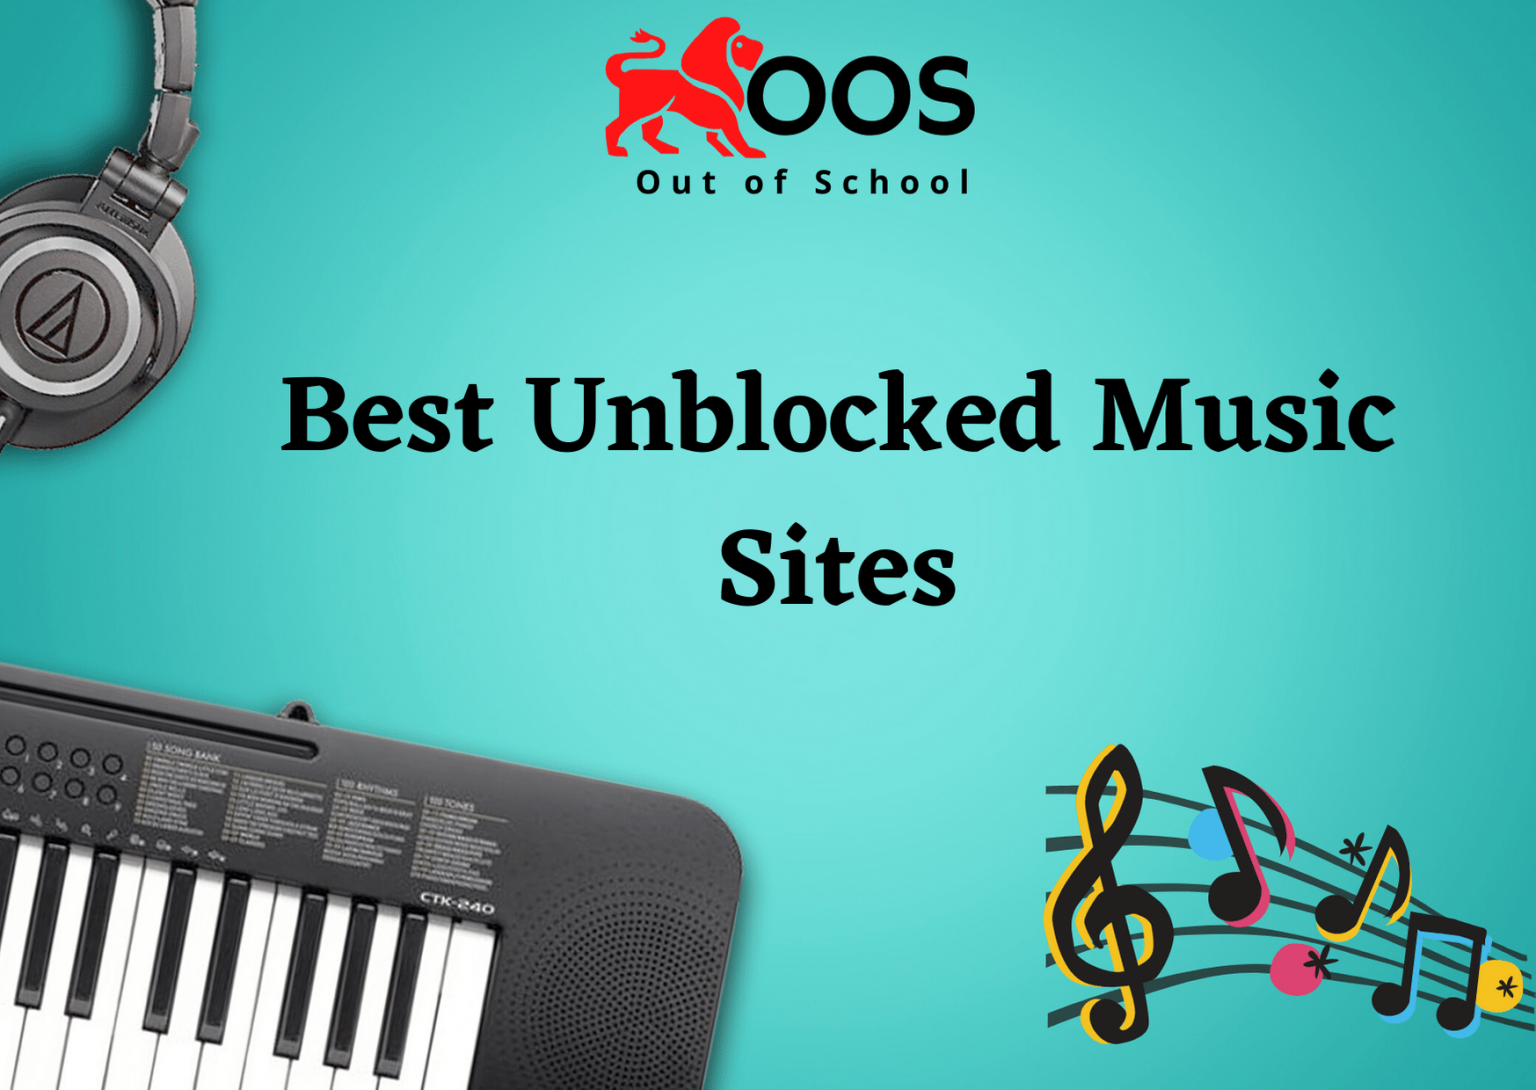 download free music from youtube unblocked at school